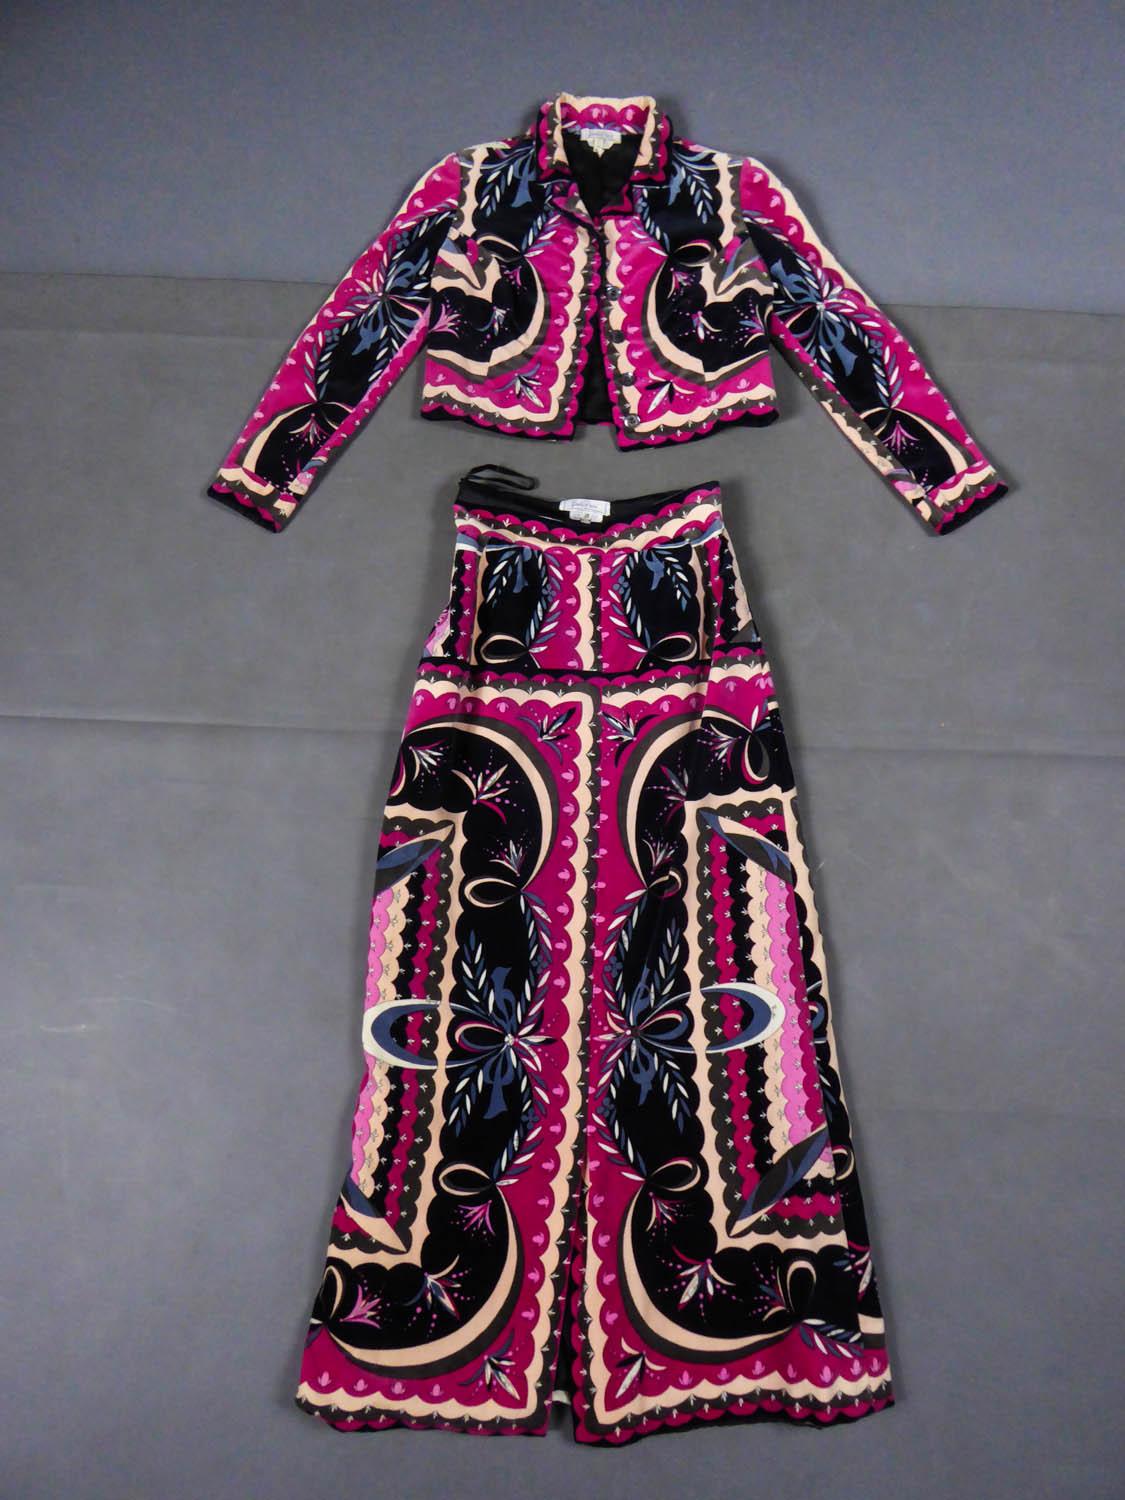 Circa 1970
Italie

Blazer jacket and skirt set in velvet cotton with psychedelic patterns in shades of pink, beige, midnight blue, brown and black by Emilio Pucci and dating from the 1970s. Short and fitted acket with small collar closing at the